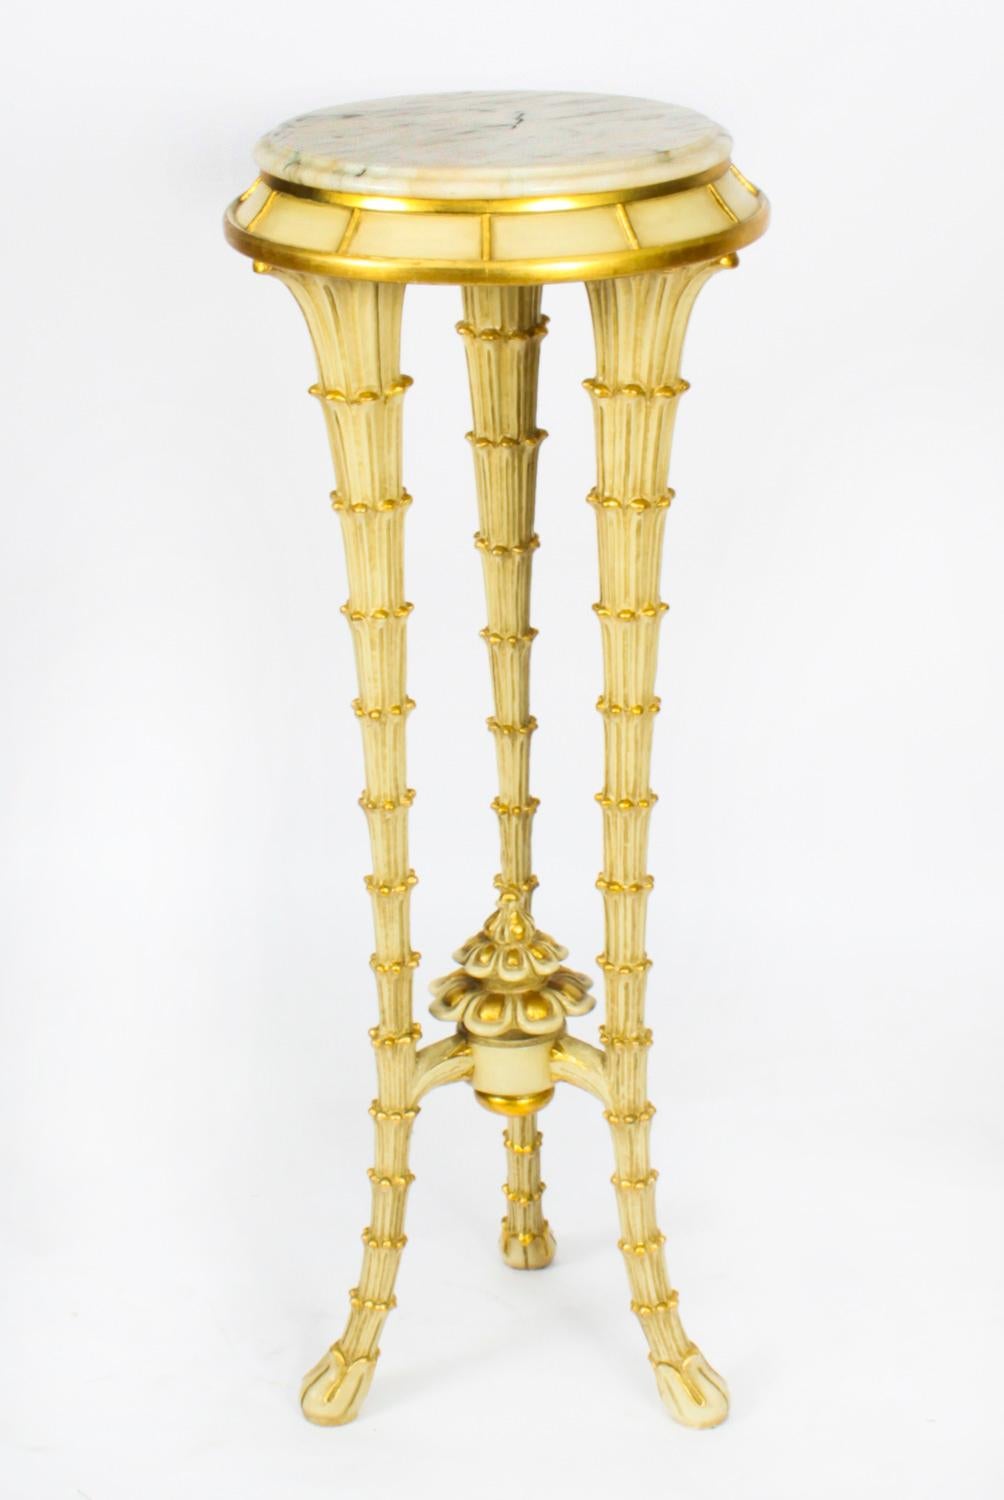 This is a gorgeous vintage Hollywood Regency cream and gilt painted white marble topped pedestal, circa 1950 in date.

The circular marble top is raised on tripod legs which are carved in the form of tapering palm tree trunks united with an 'x'